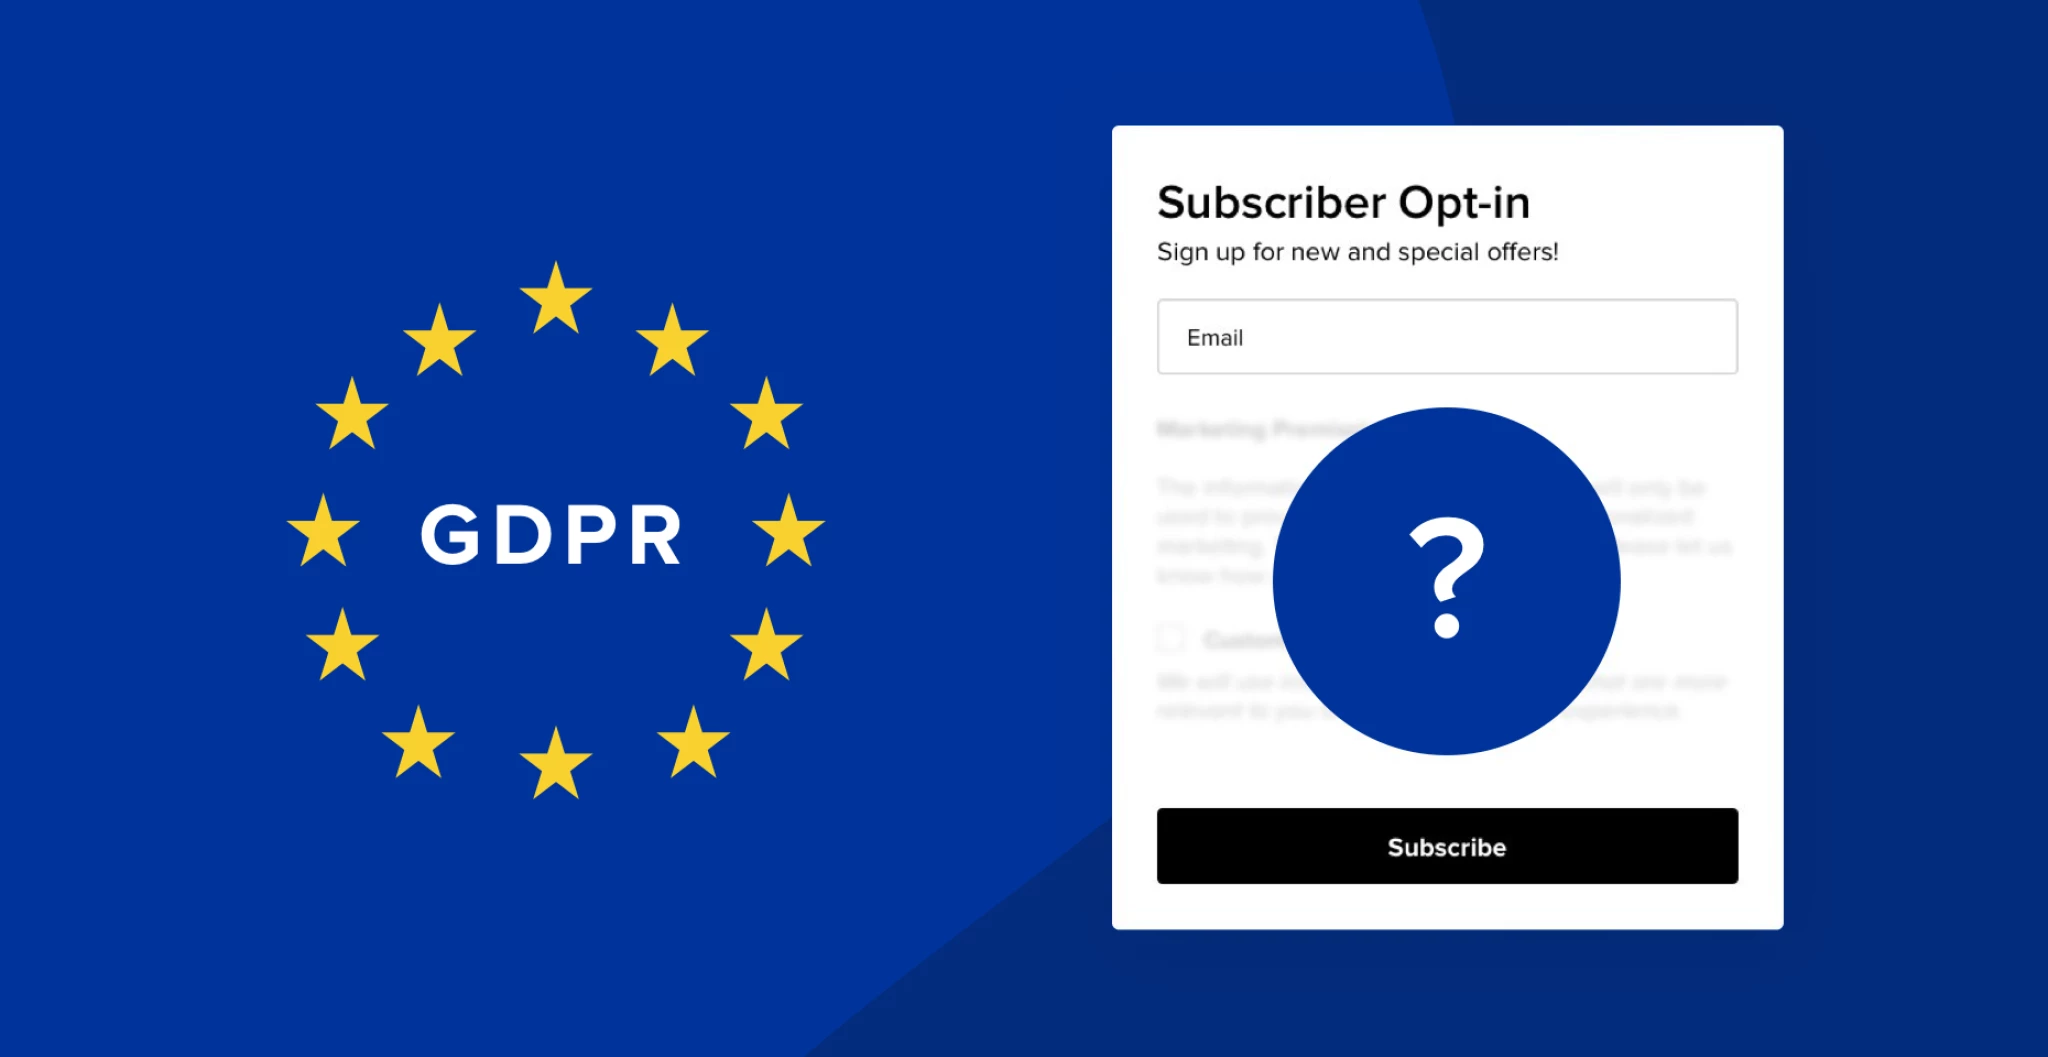 WooCommerce GDPR - Add privacy & consent checkbox to Checkout